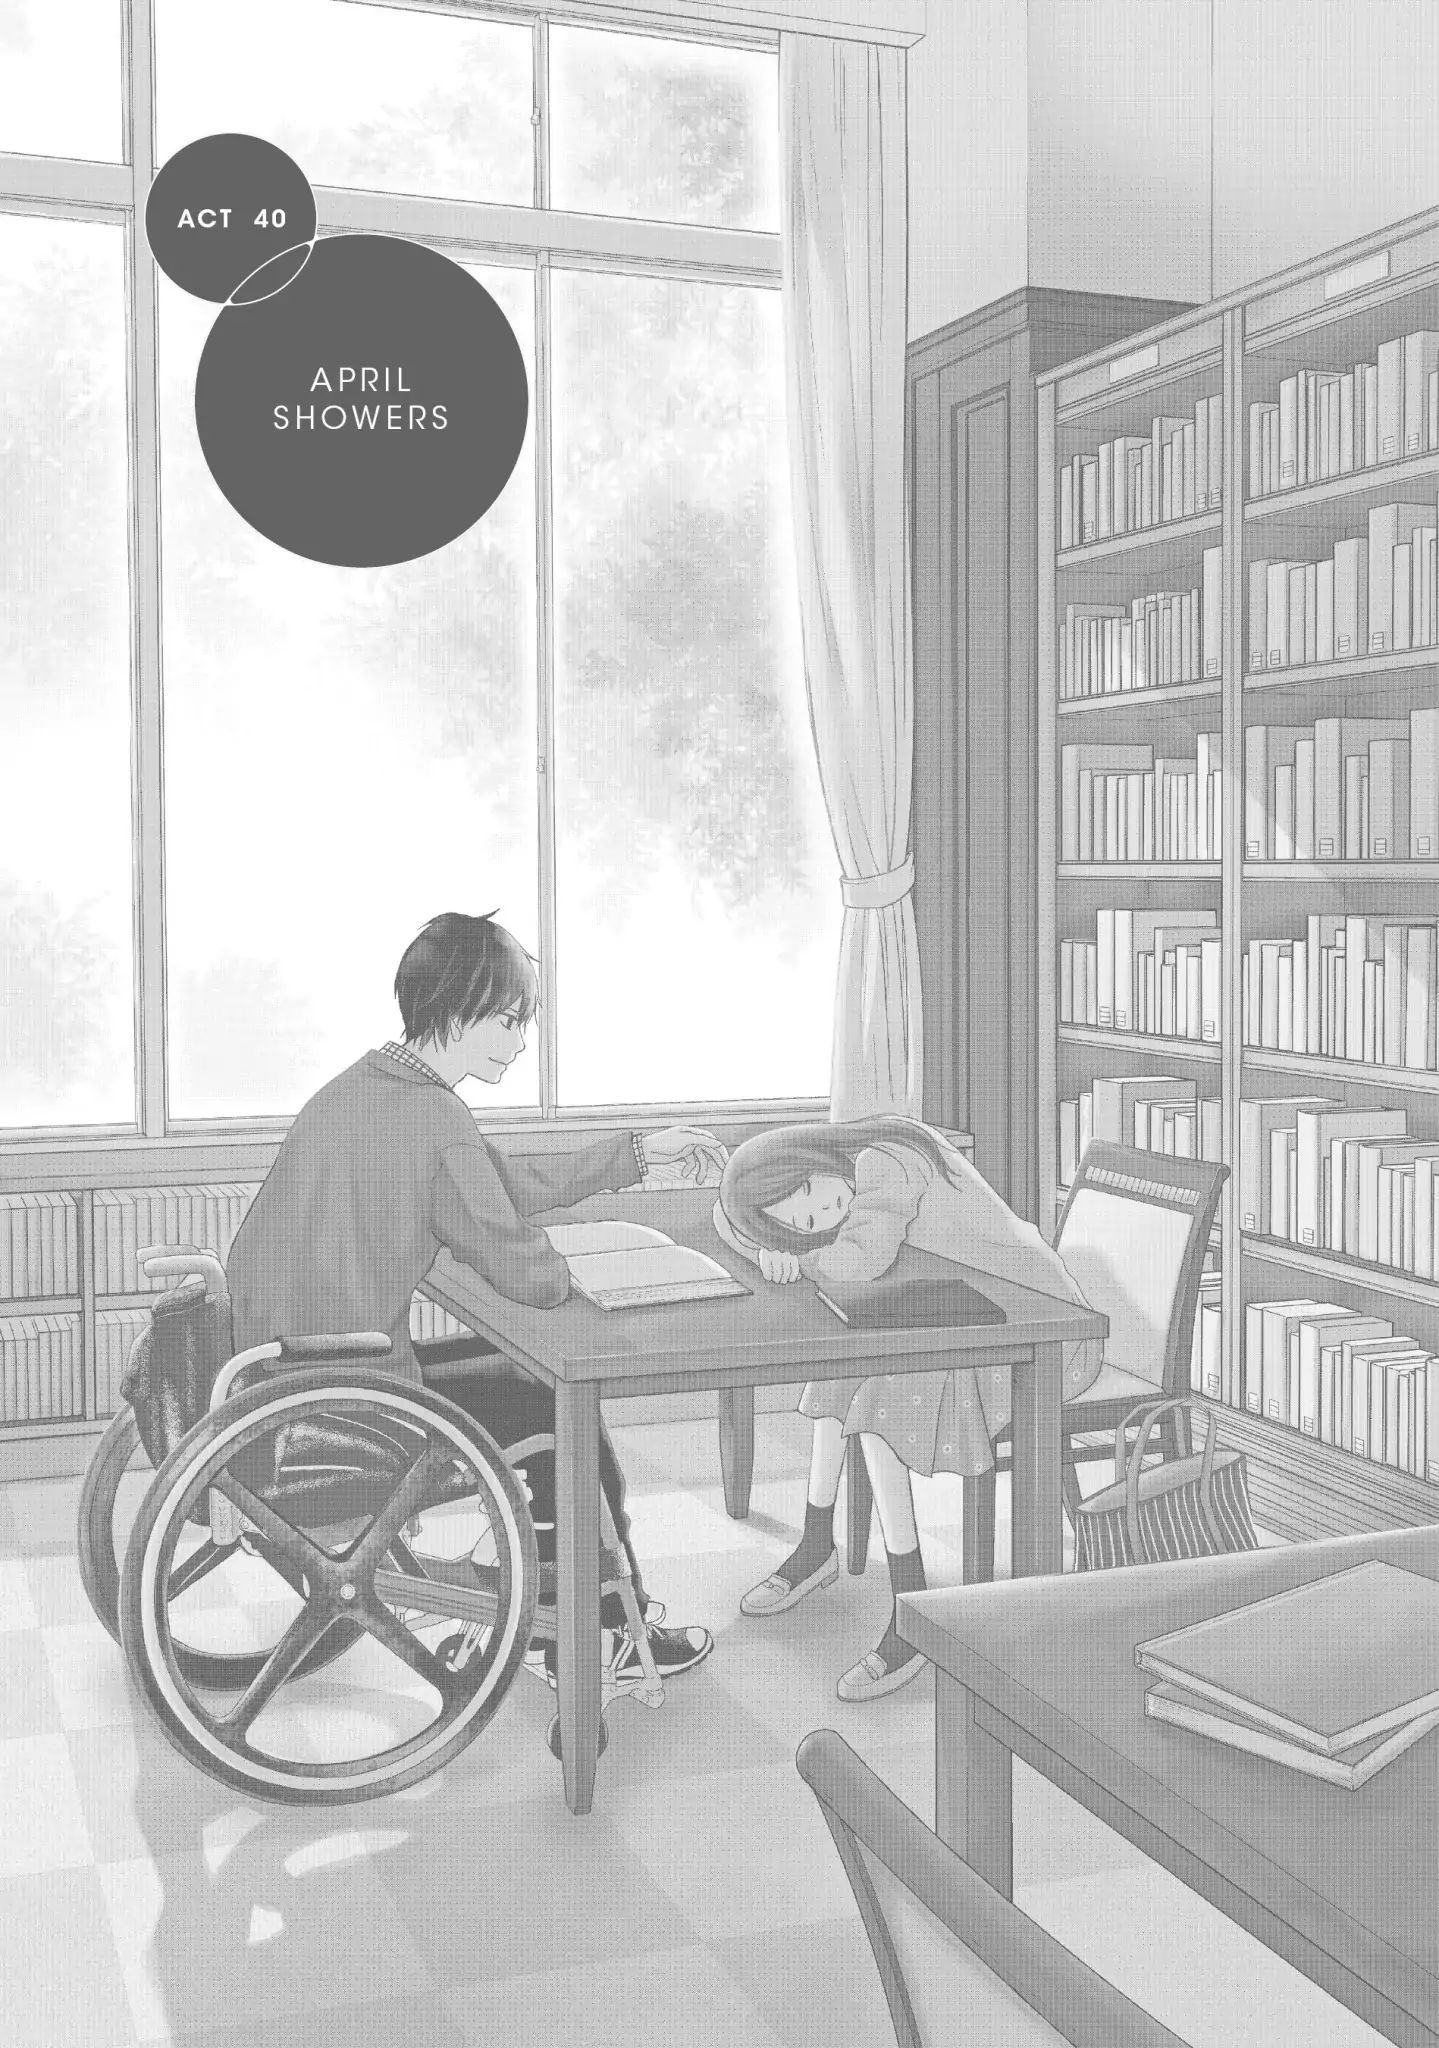 Perfect World (ARUGA Rie) - chapter 40 - #4